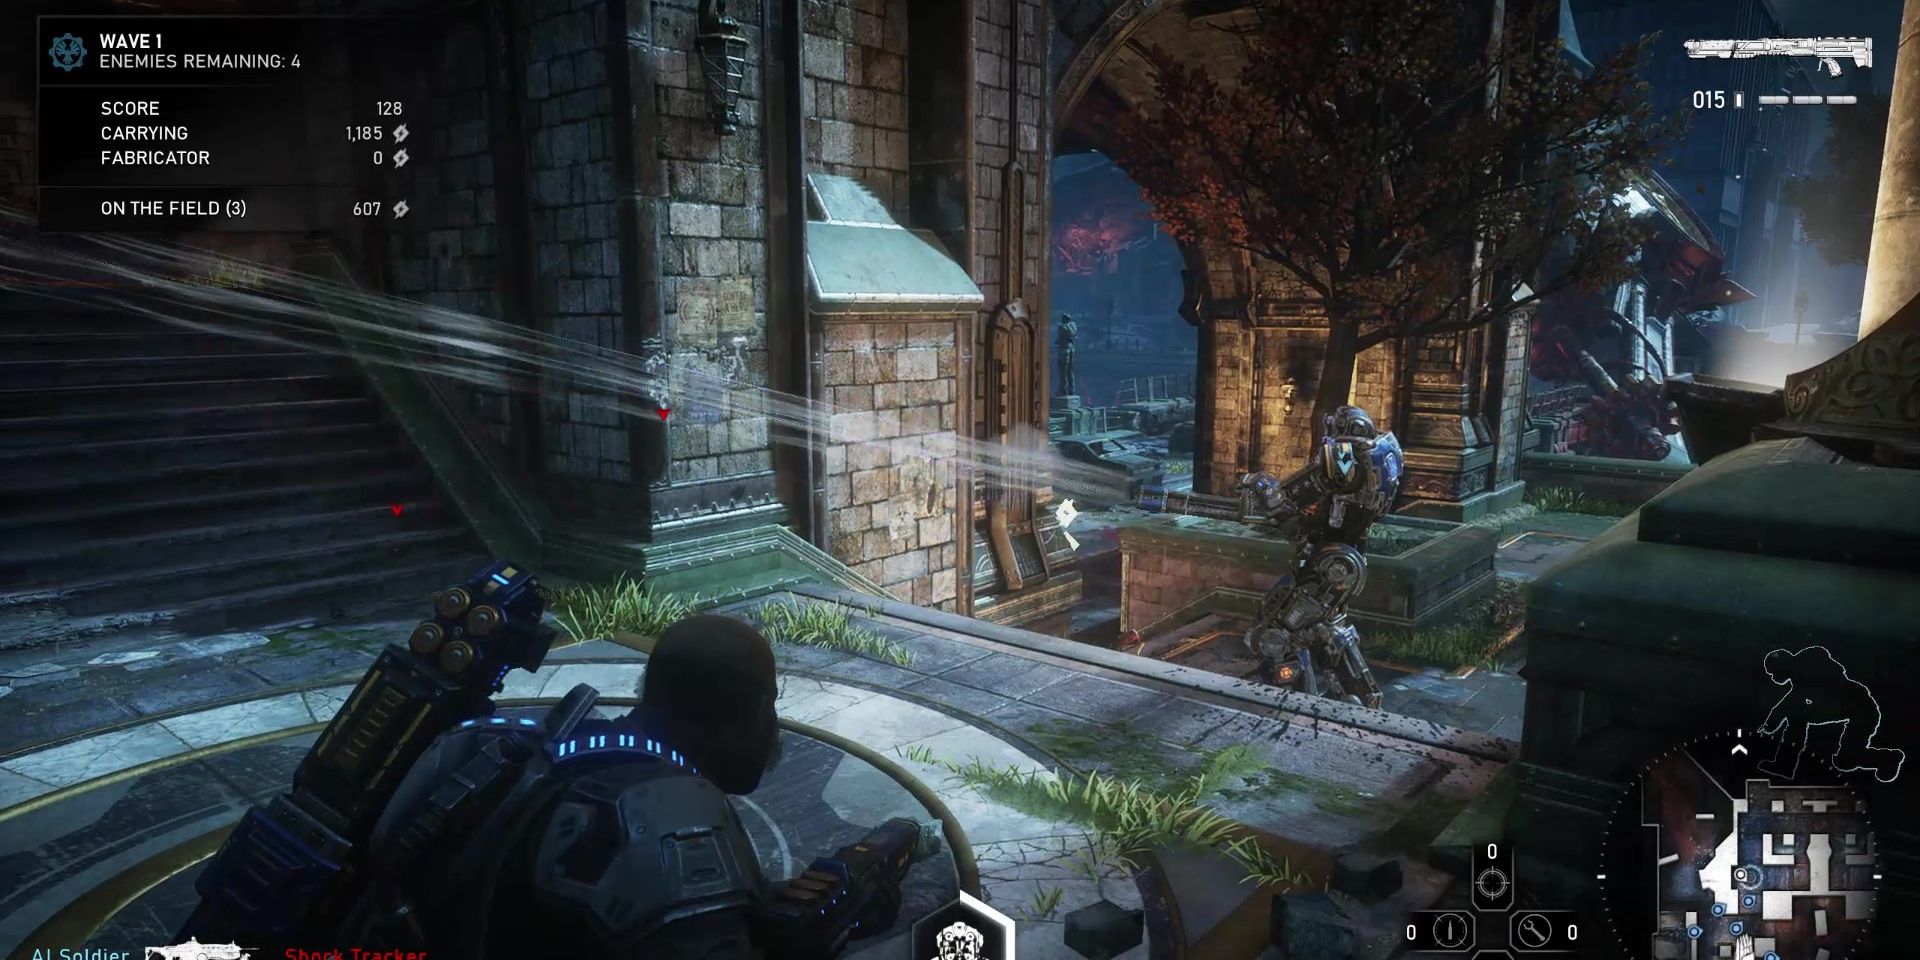 Robotics Expert special ability in Gears 5